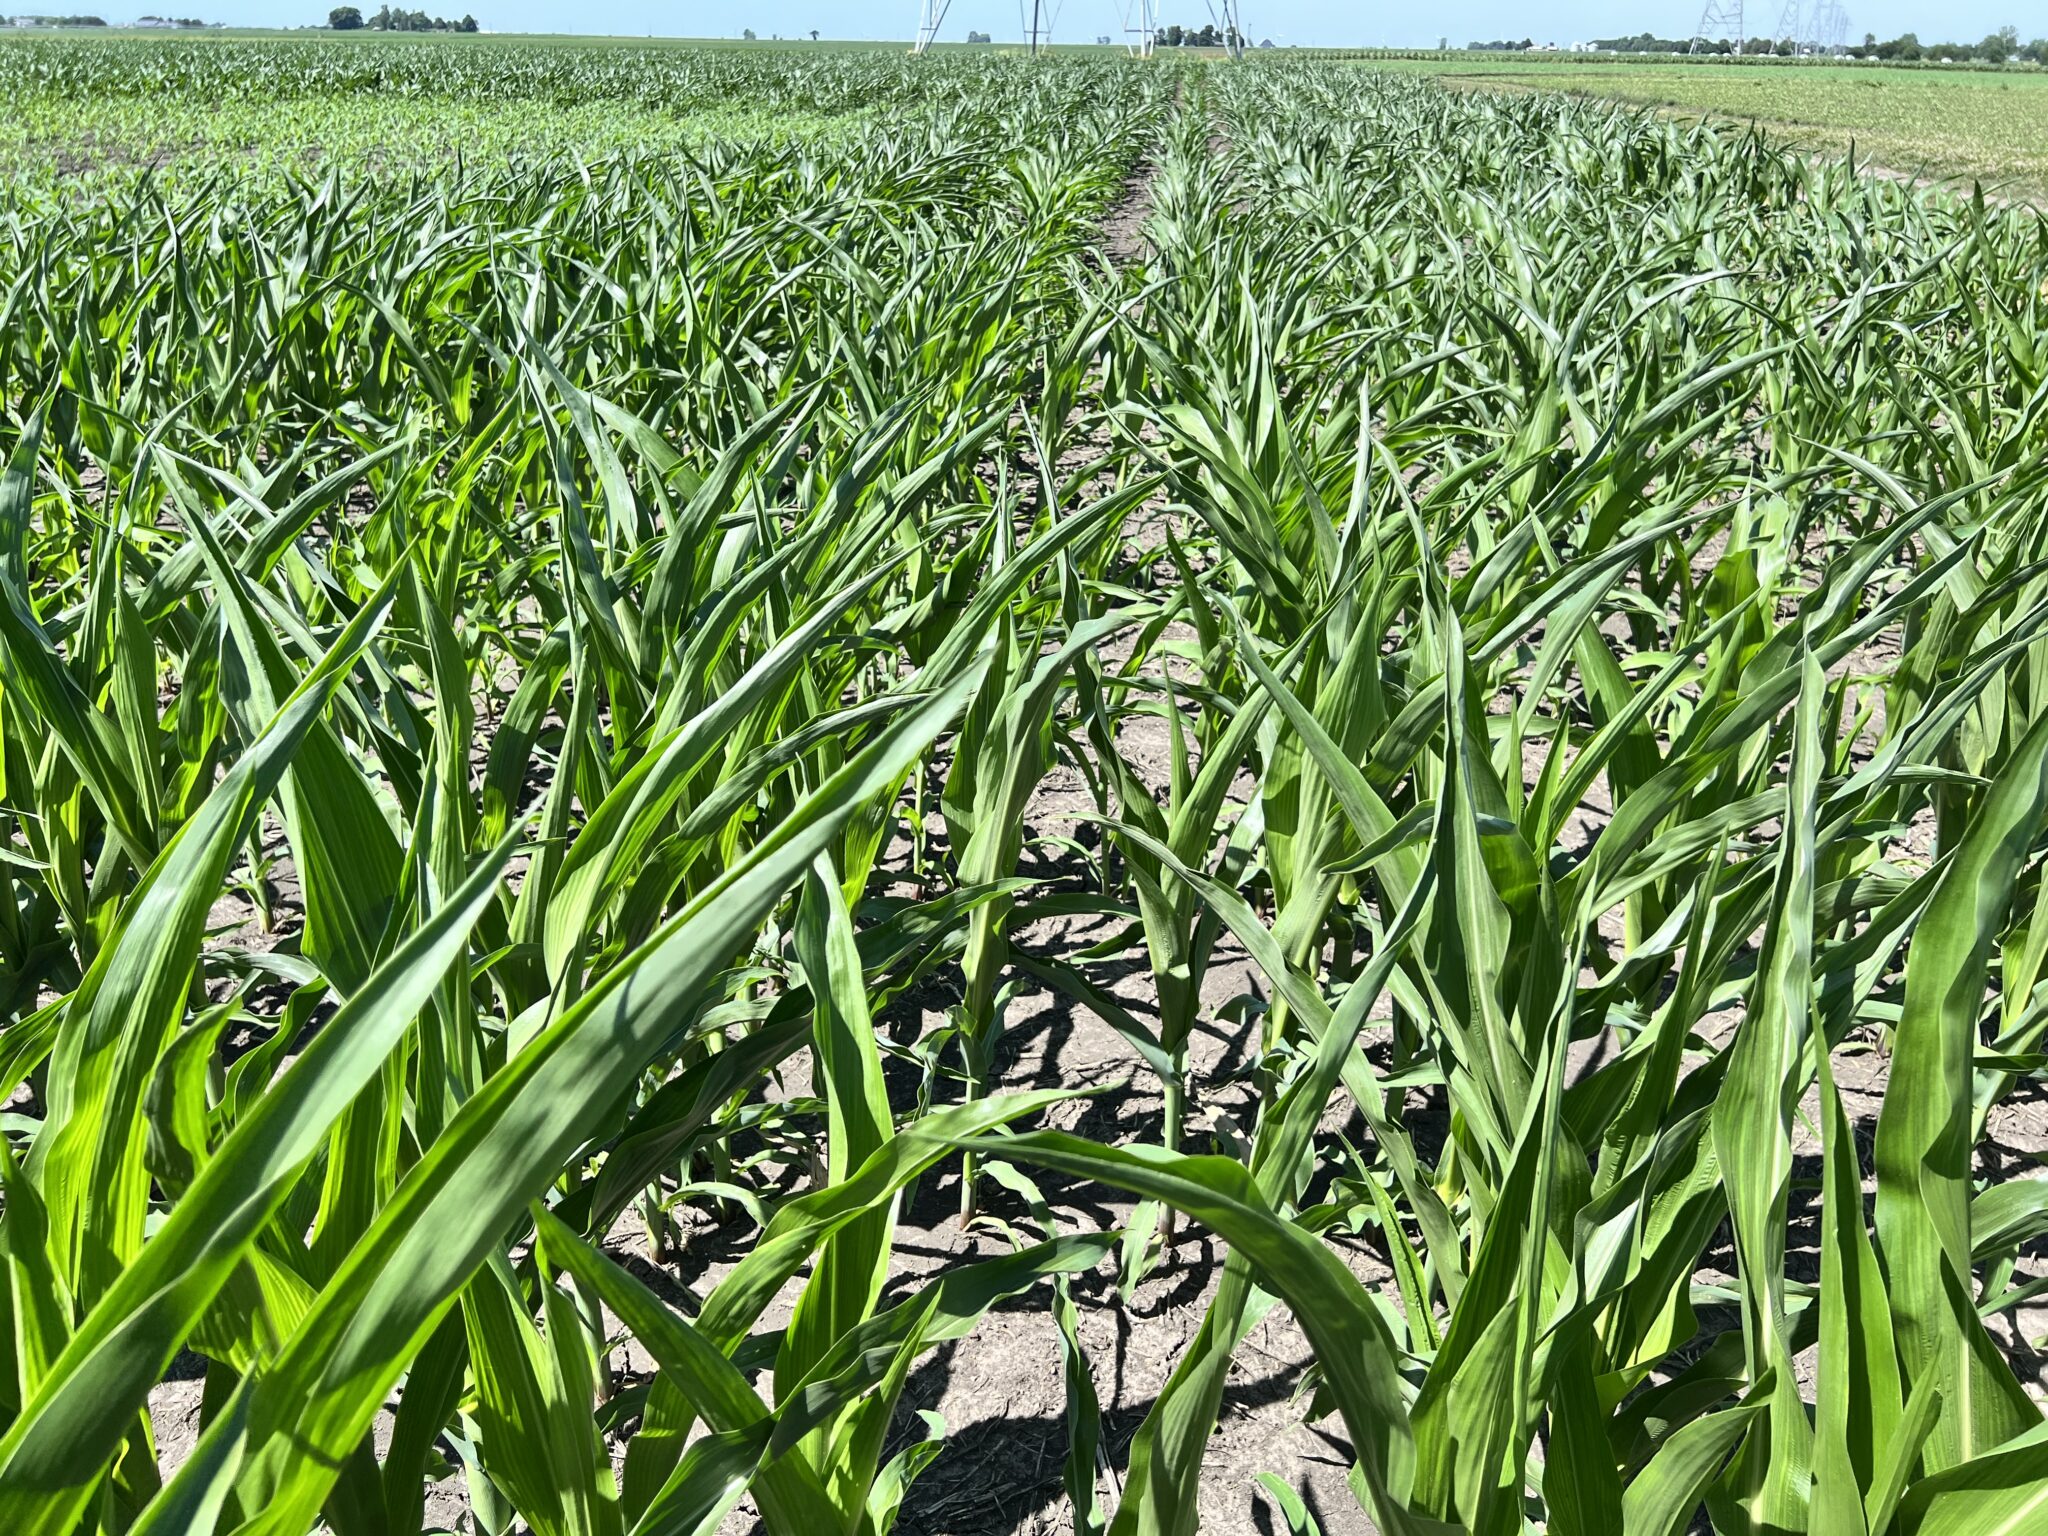 Corn exhibiting leaf rolling symptoms due to high heat and dry soil conditions observed in 2022.